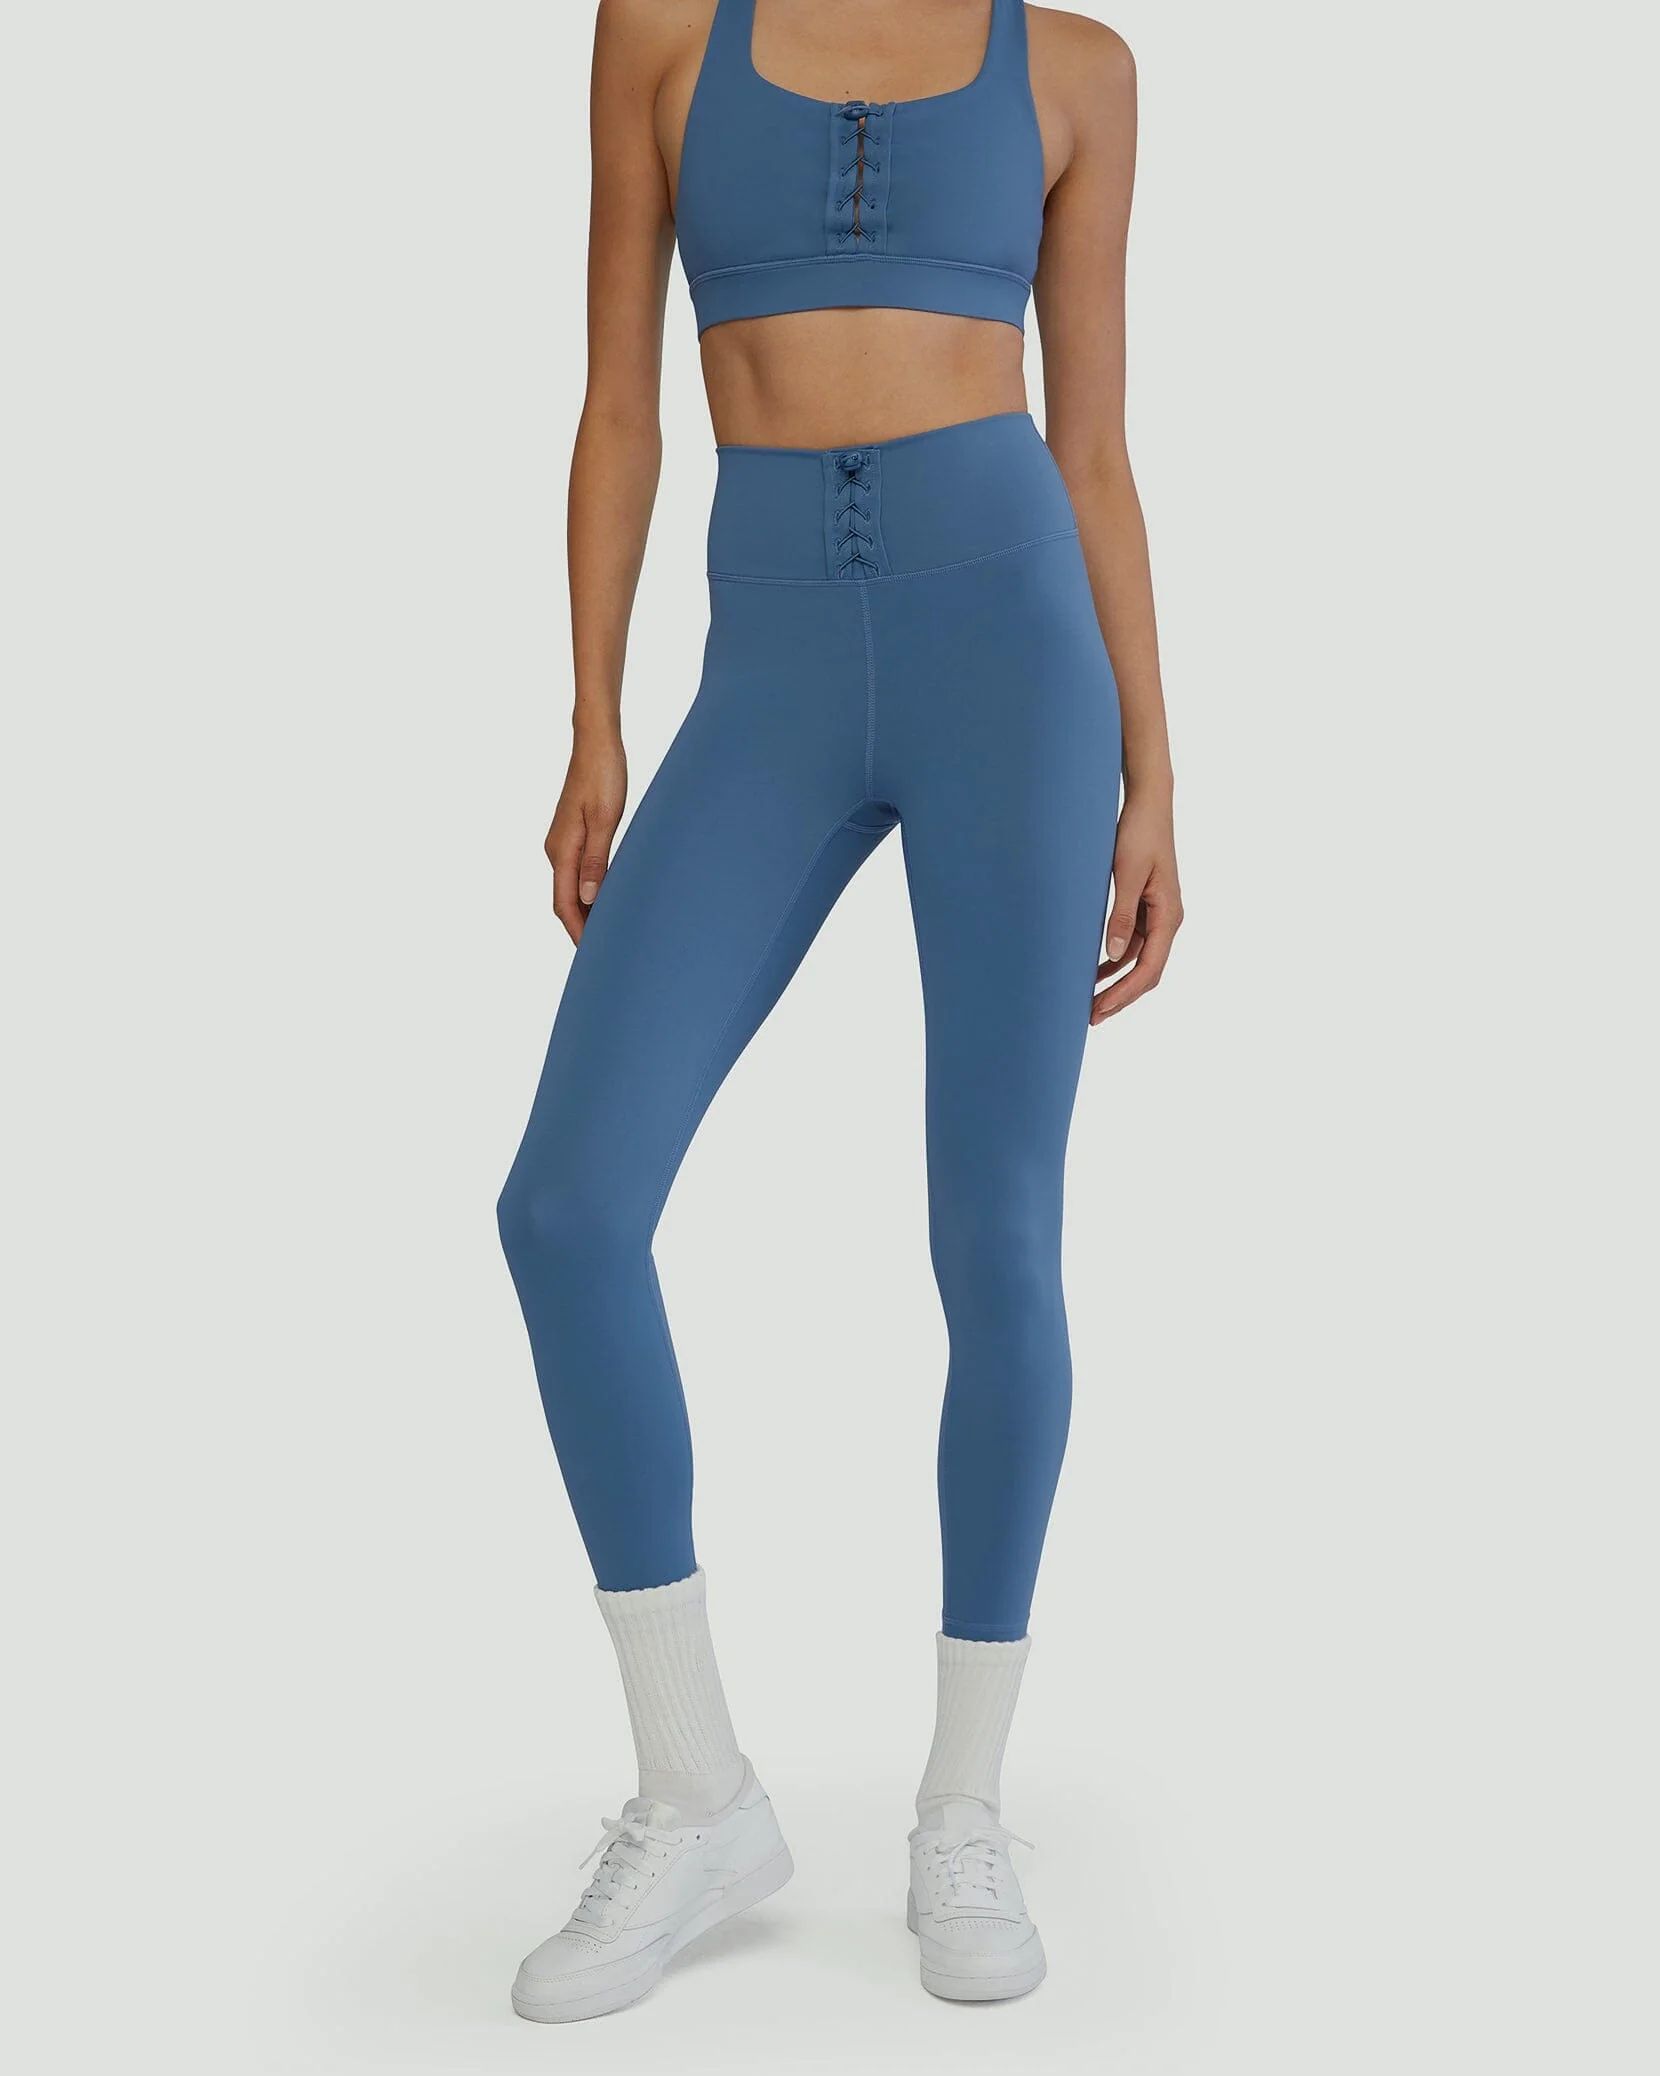 Lace Up Legging | IVL COLLECTIVE